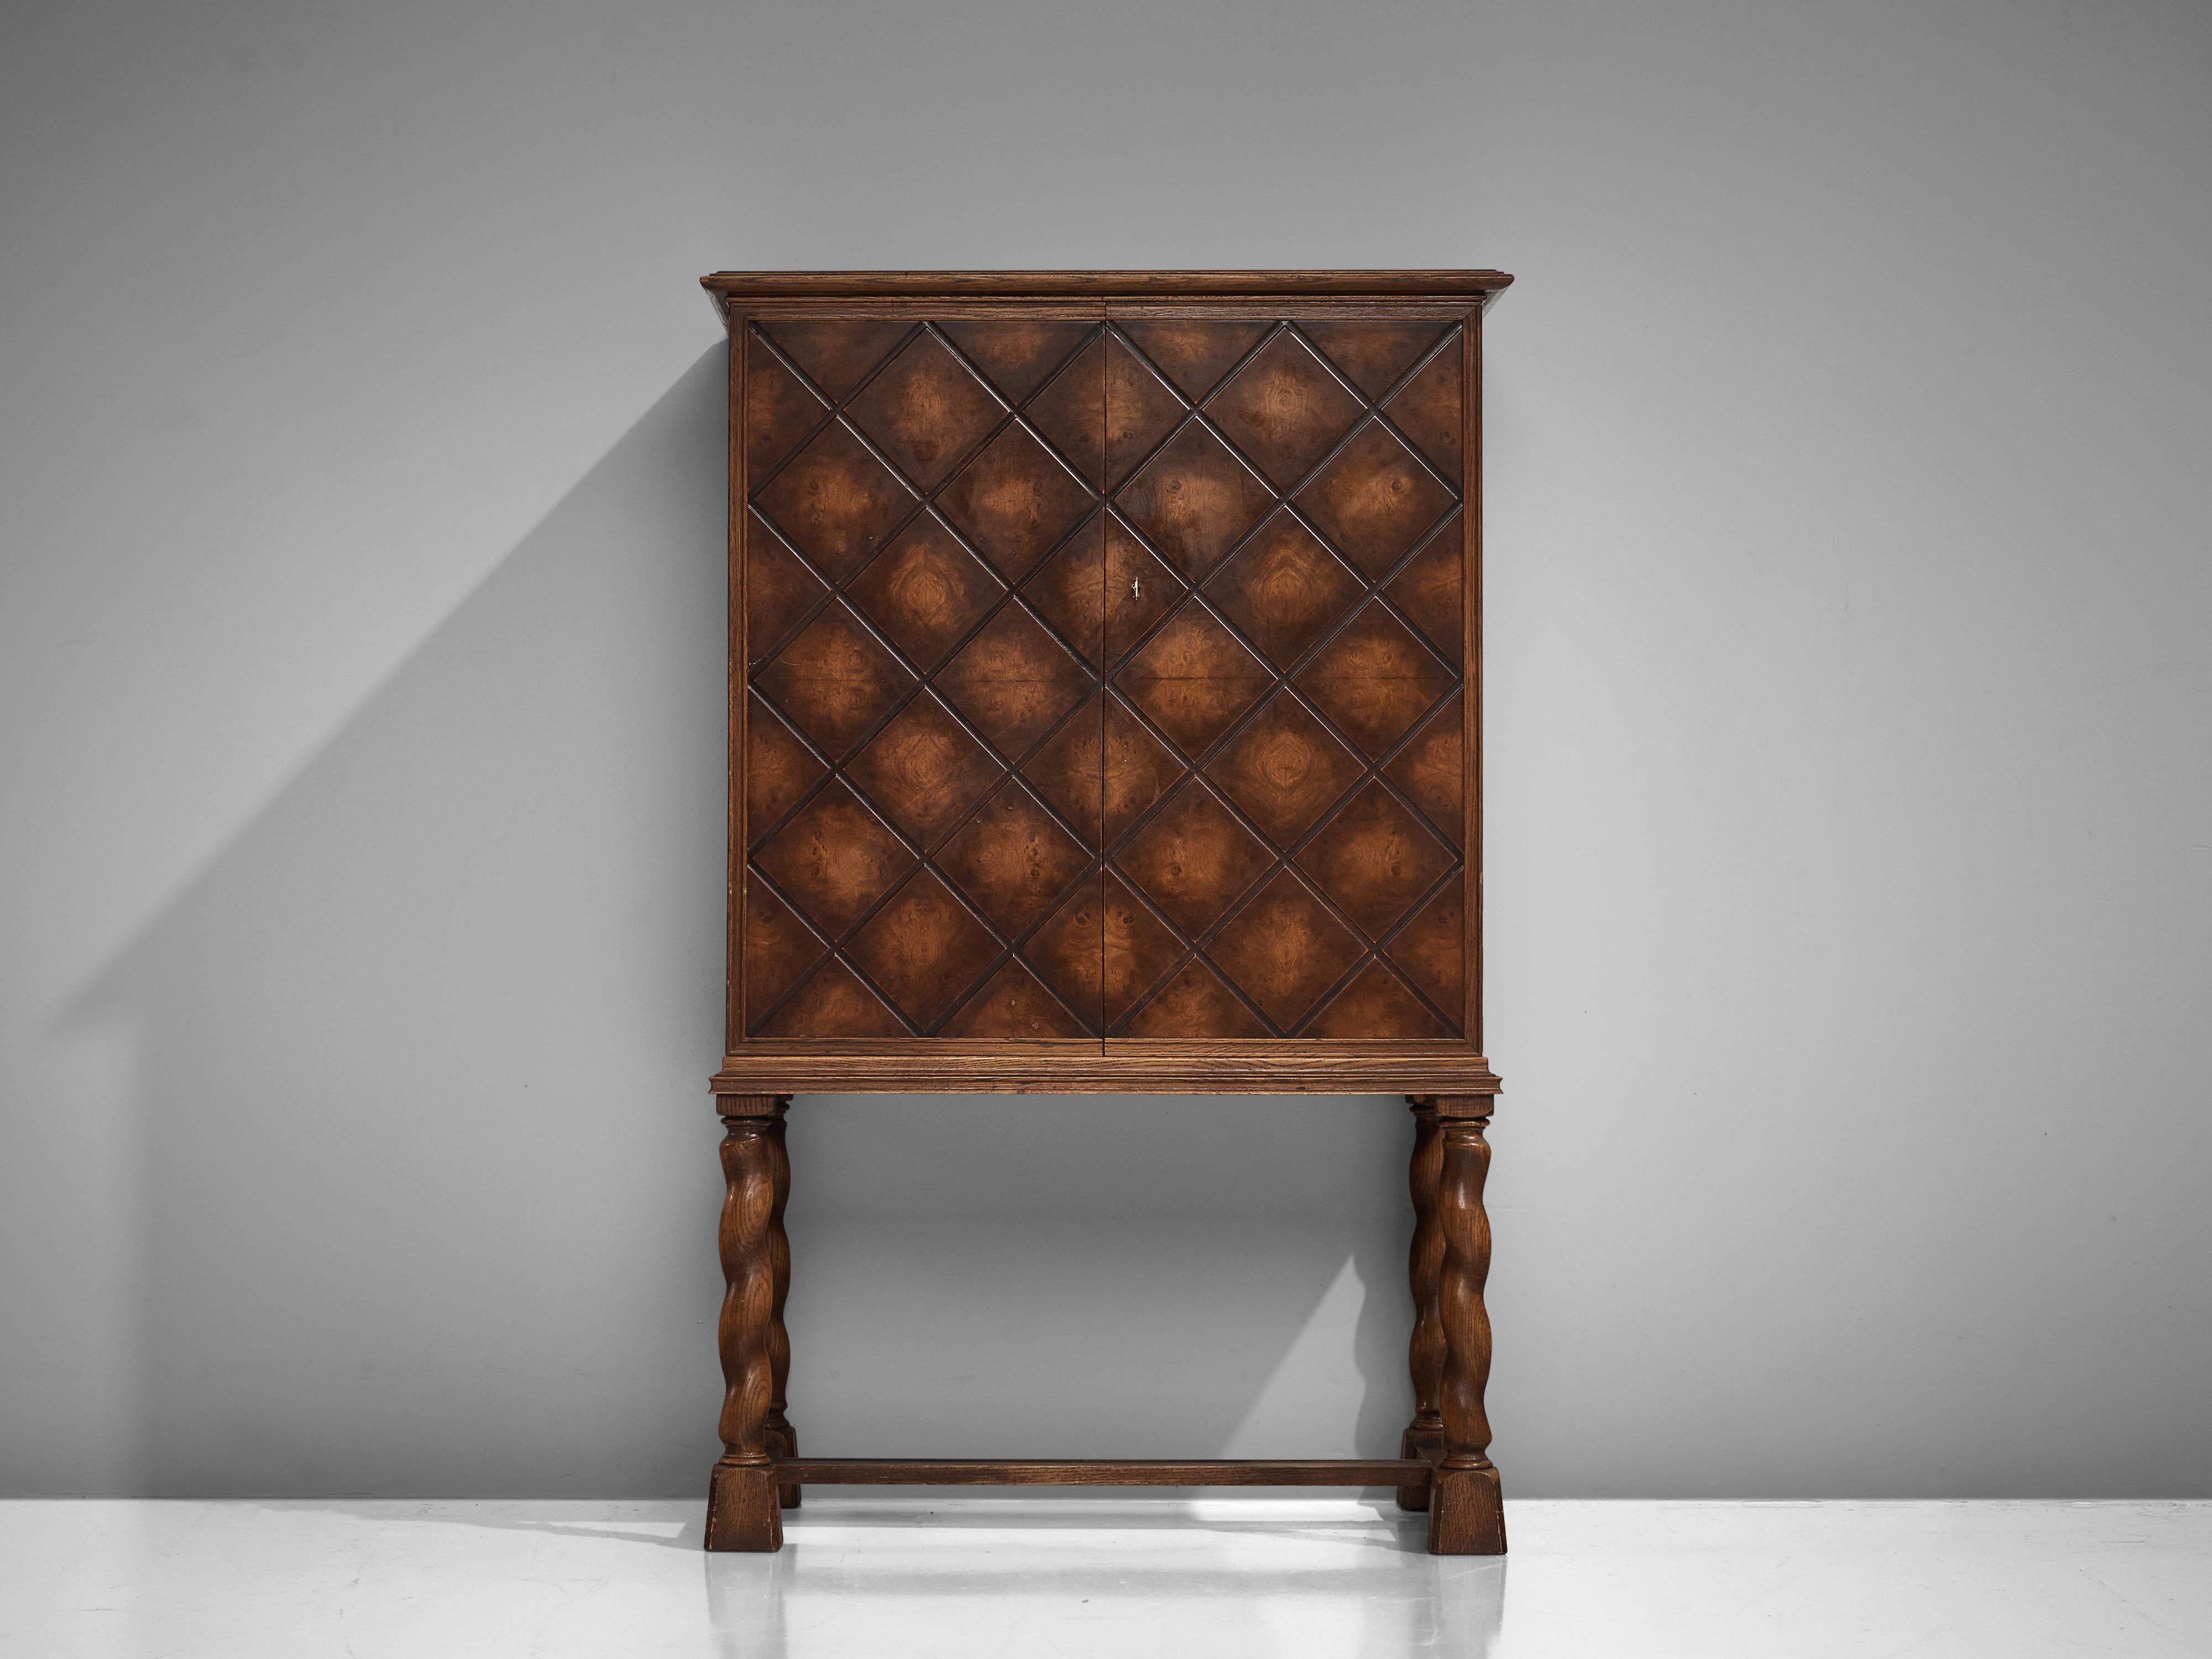 Thysells Möbler, high-legged sideboard, oak, Sweden, 1940s

This elegant sideboard is designed according to the stylistic principles of the so-called Swedish Grace style. The corpus features intricate geometric carvings with squares and diagonal